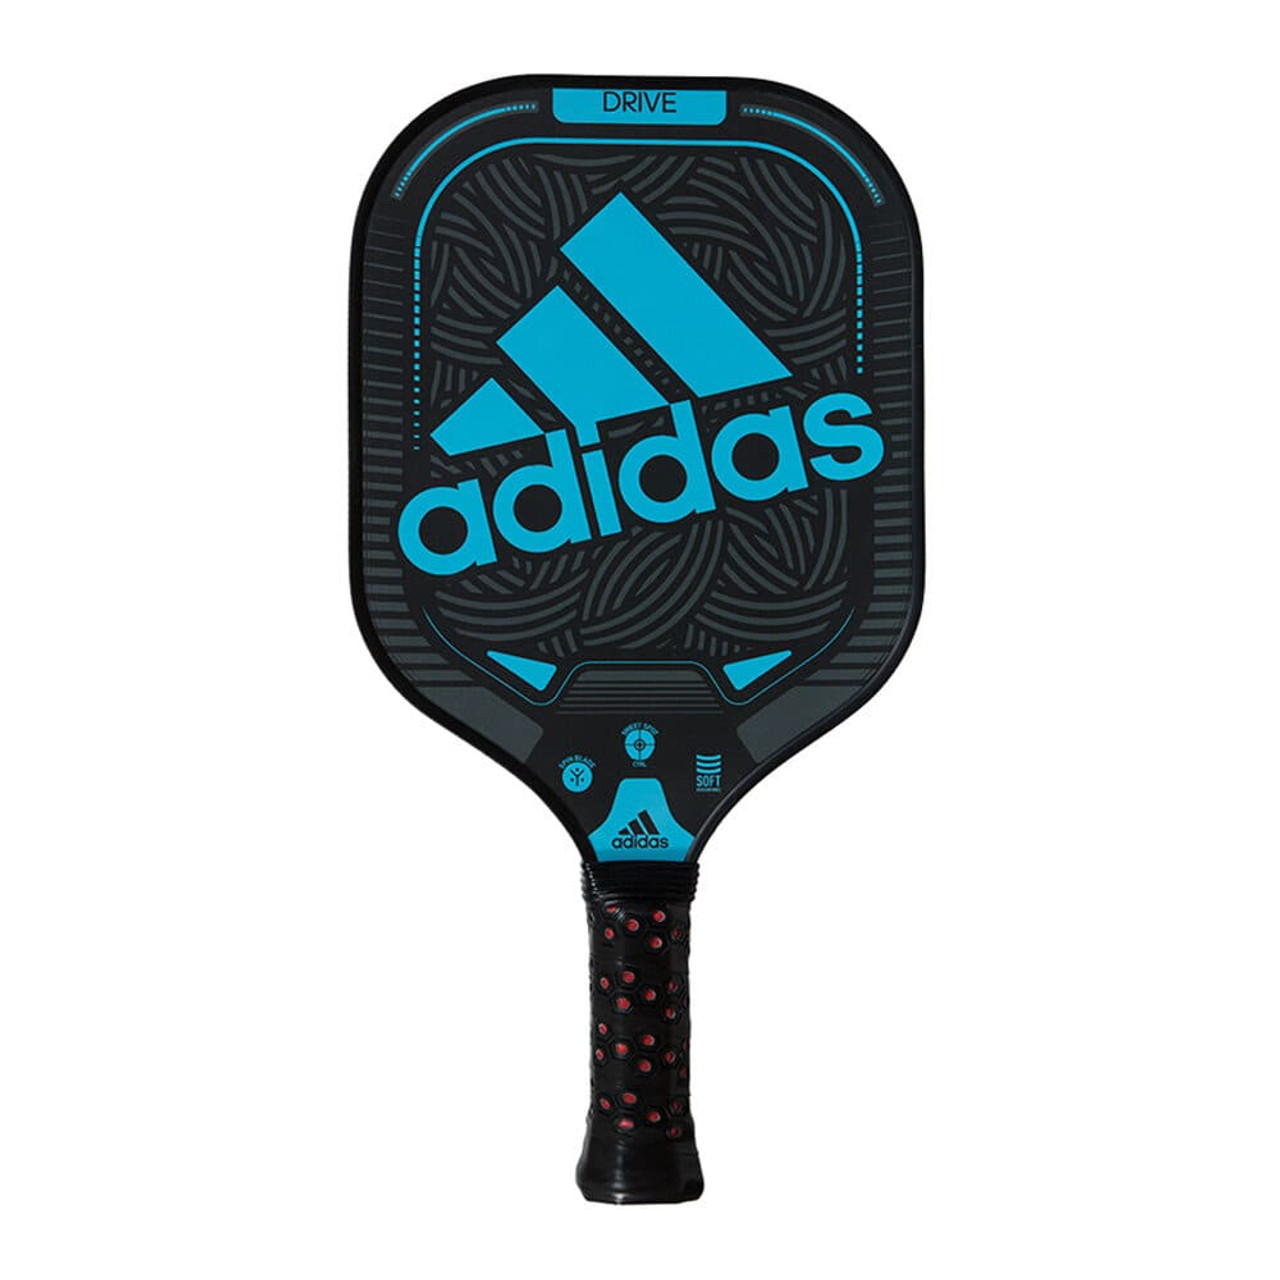 DRIVE Composite Pickleball Paddle by adidas Free Shipping Offer!